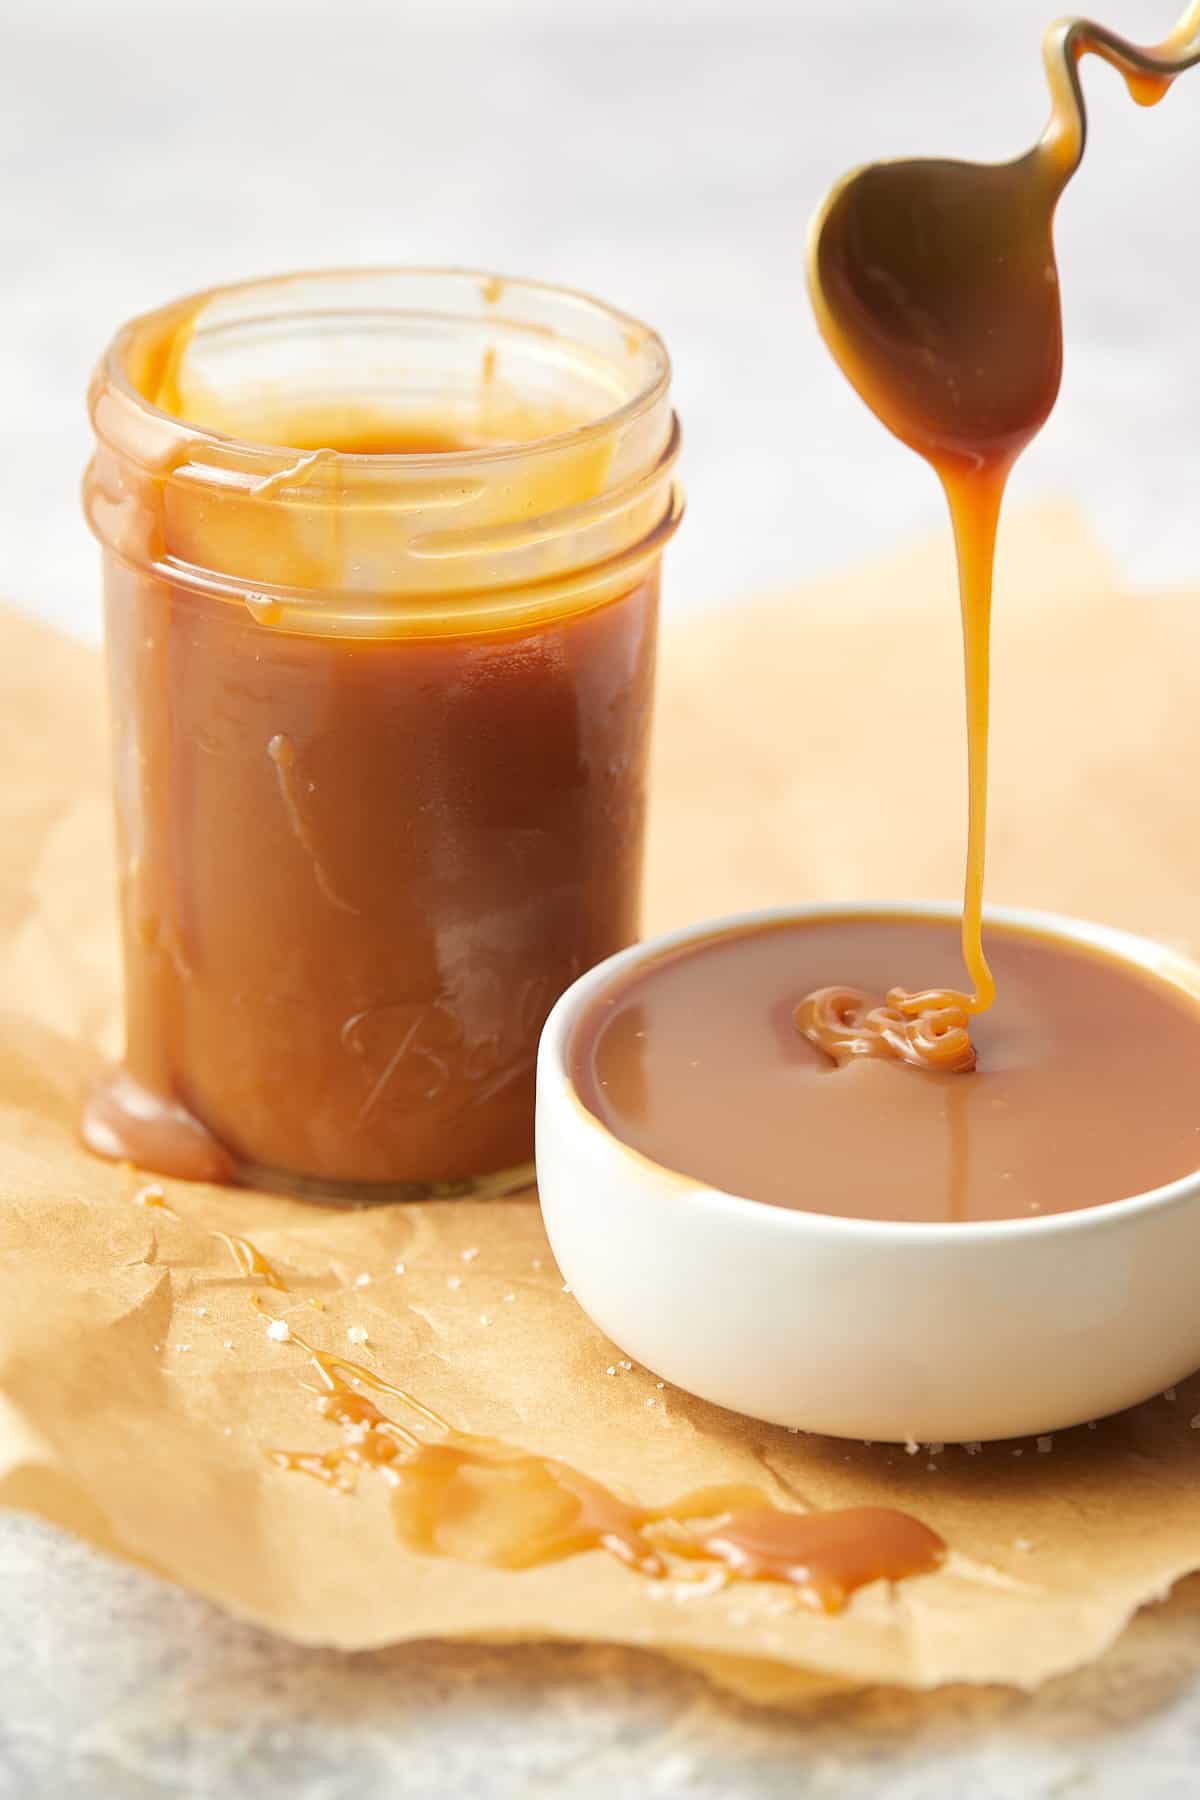 easy homemade salted caramel sauce dripping from a spoon into a small white bowl set on parchment paper. A glass jar filled with caramel sauce sits behind the bowl.